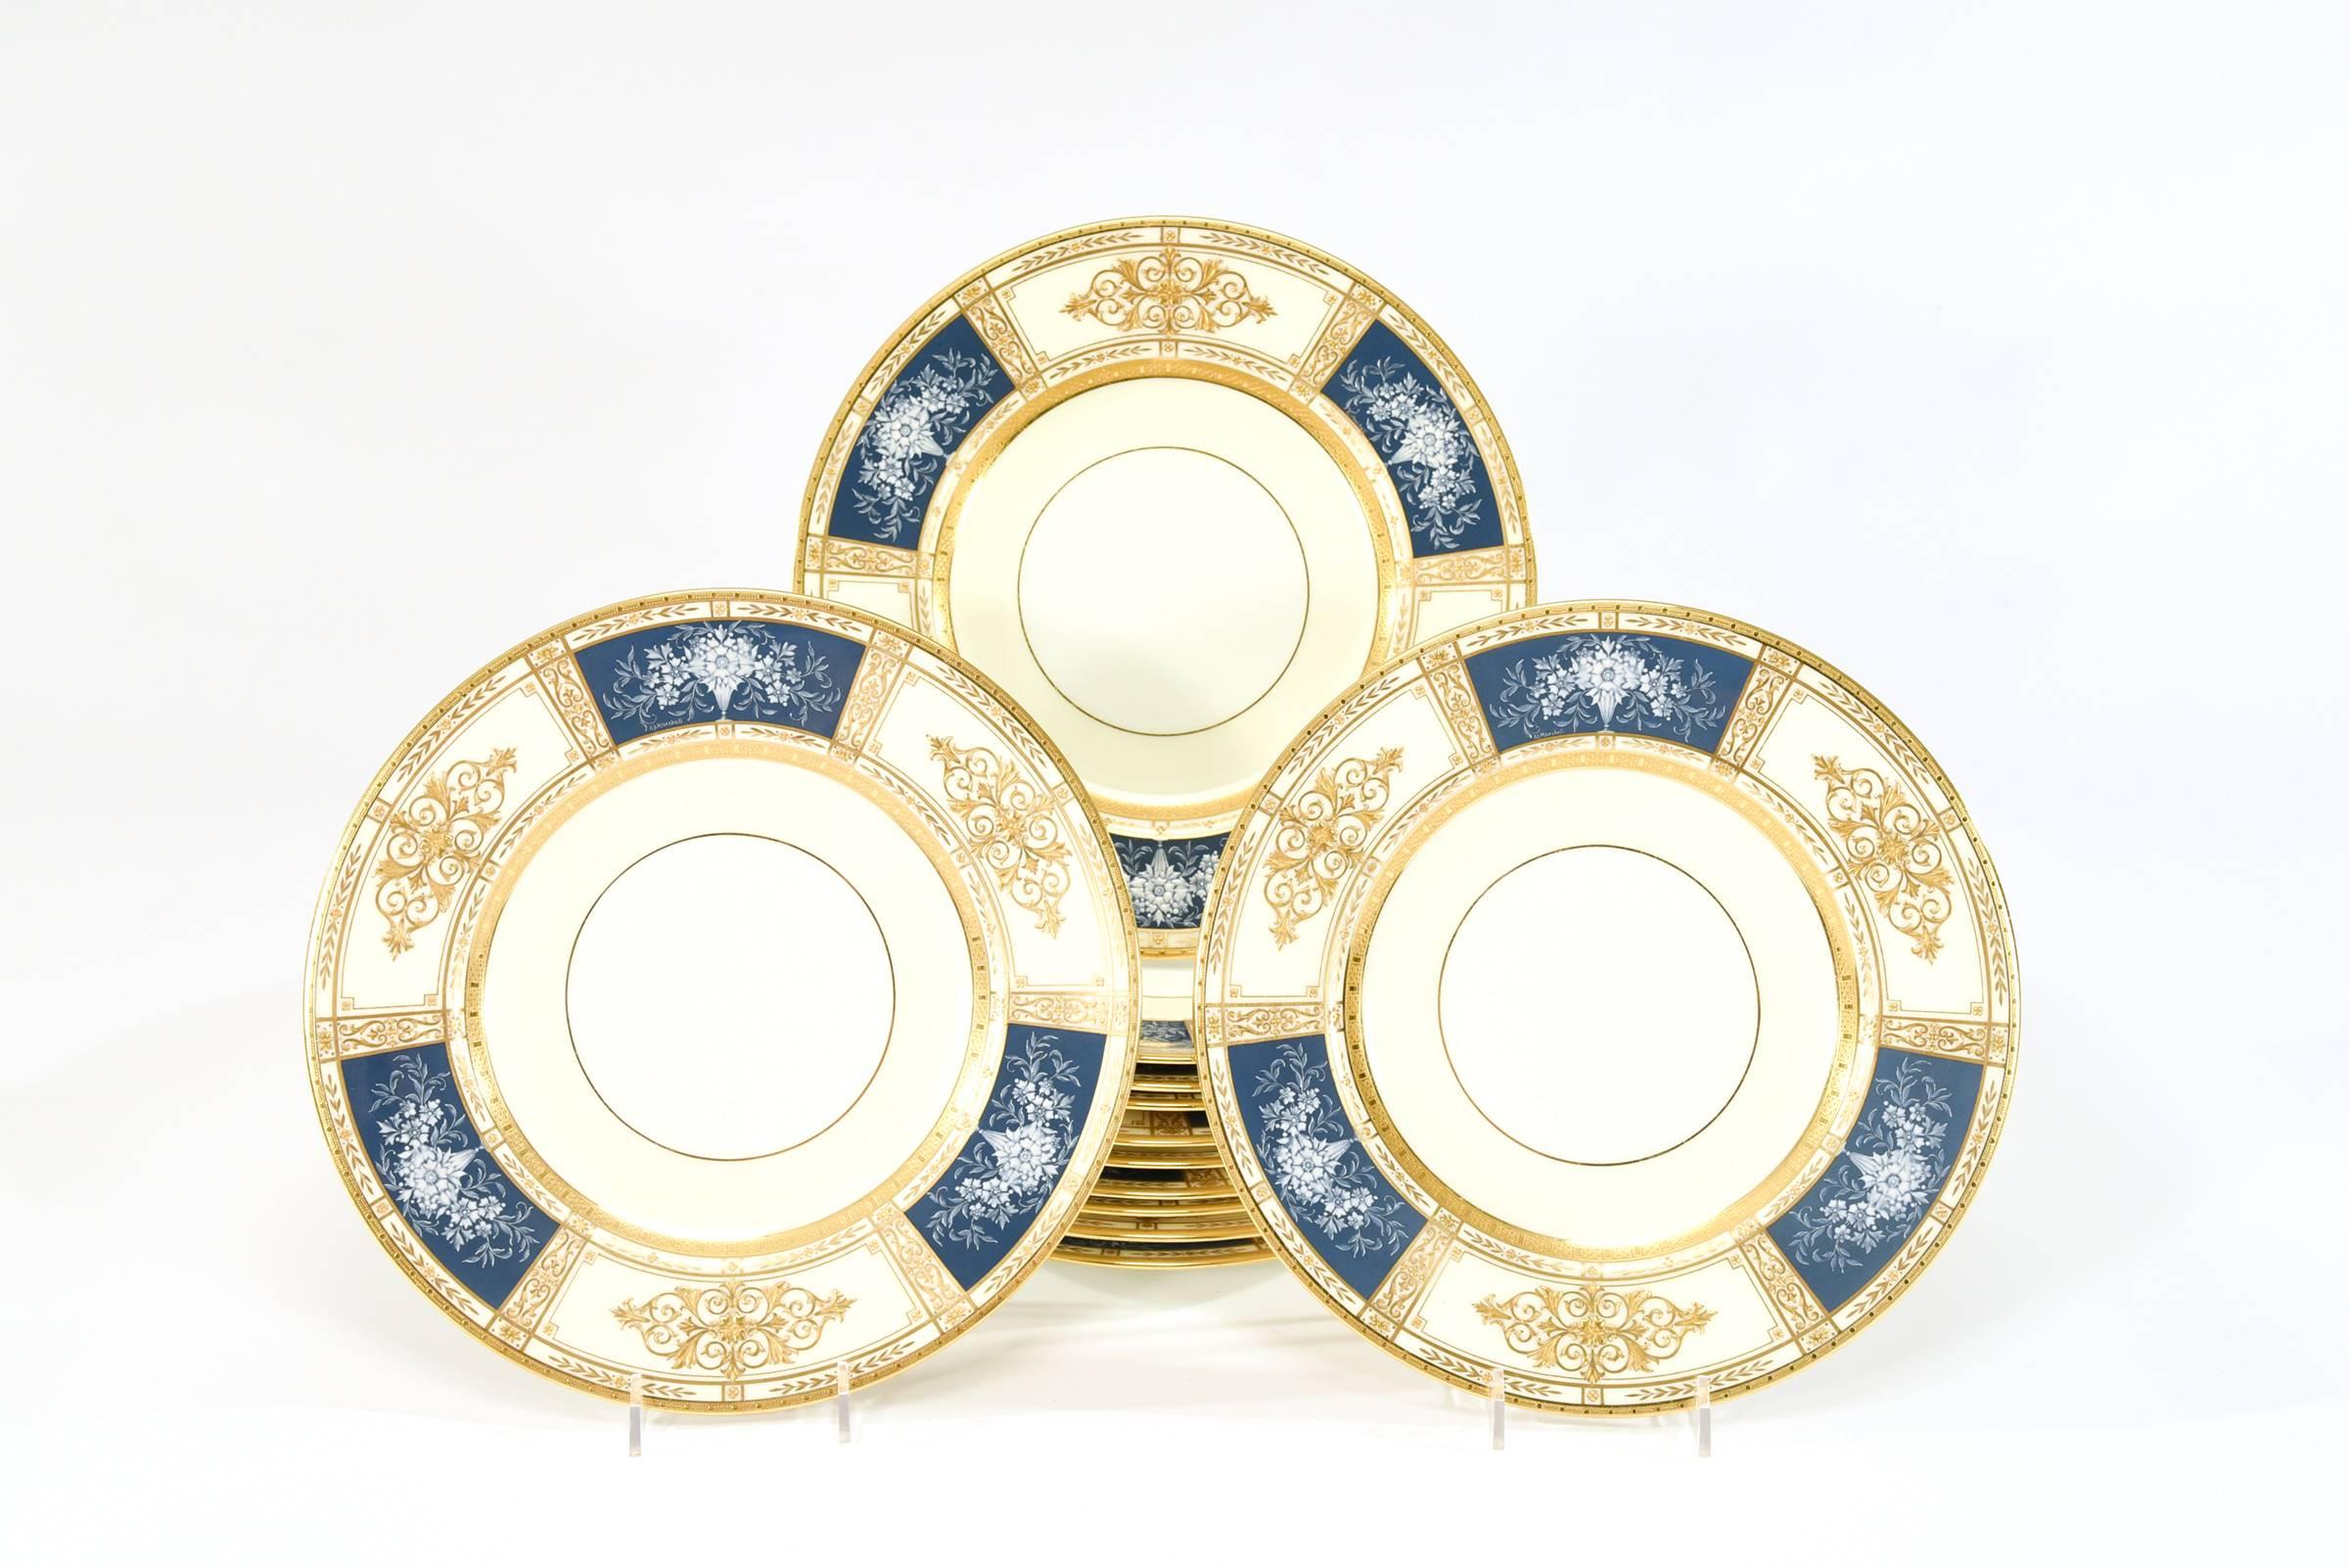 This set of 12 Minton dinner plates exhibits the beauty and quality of Minton's top of the line offerings. The acid etched gold border frames the three neoclassical reserves of raised paste gold and beading alternating with three blue reserves